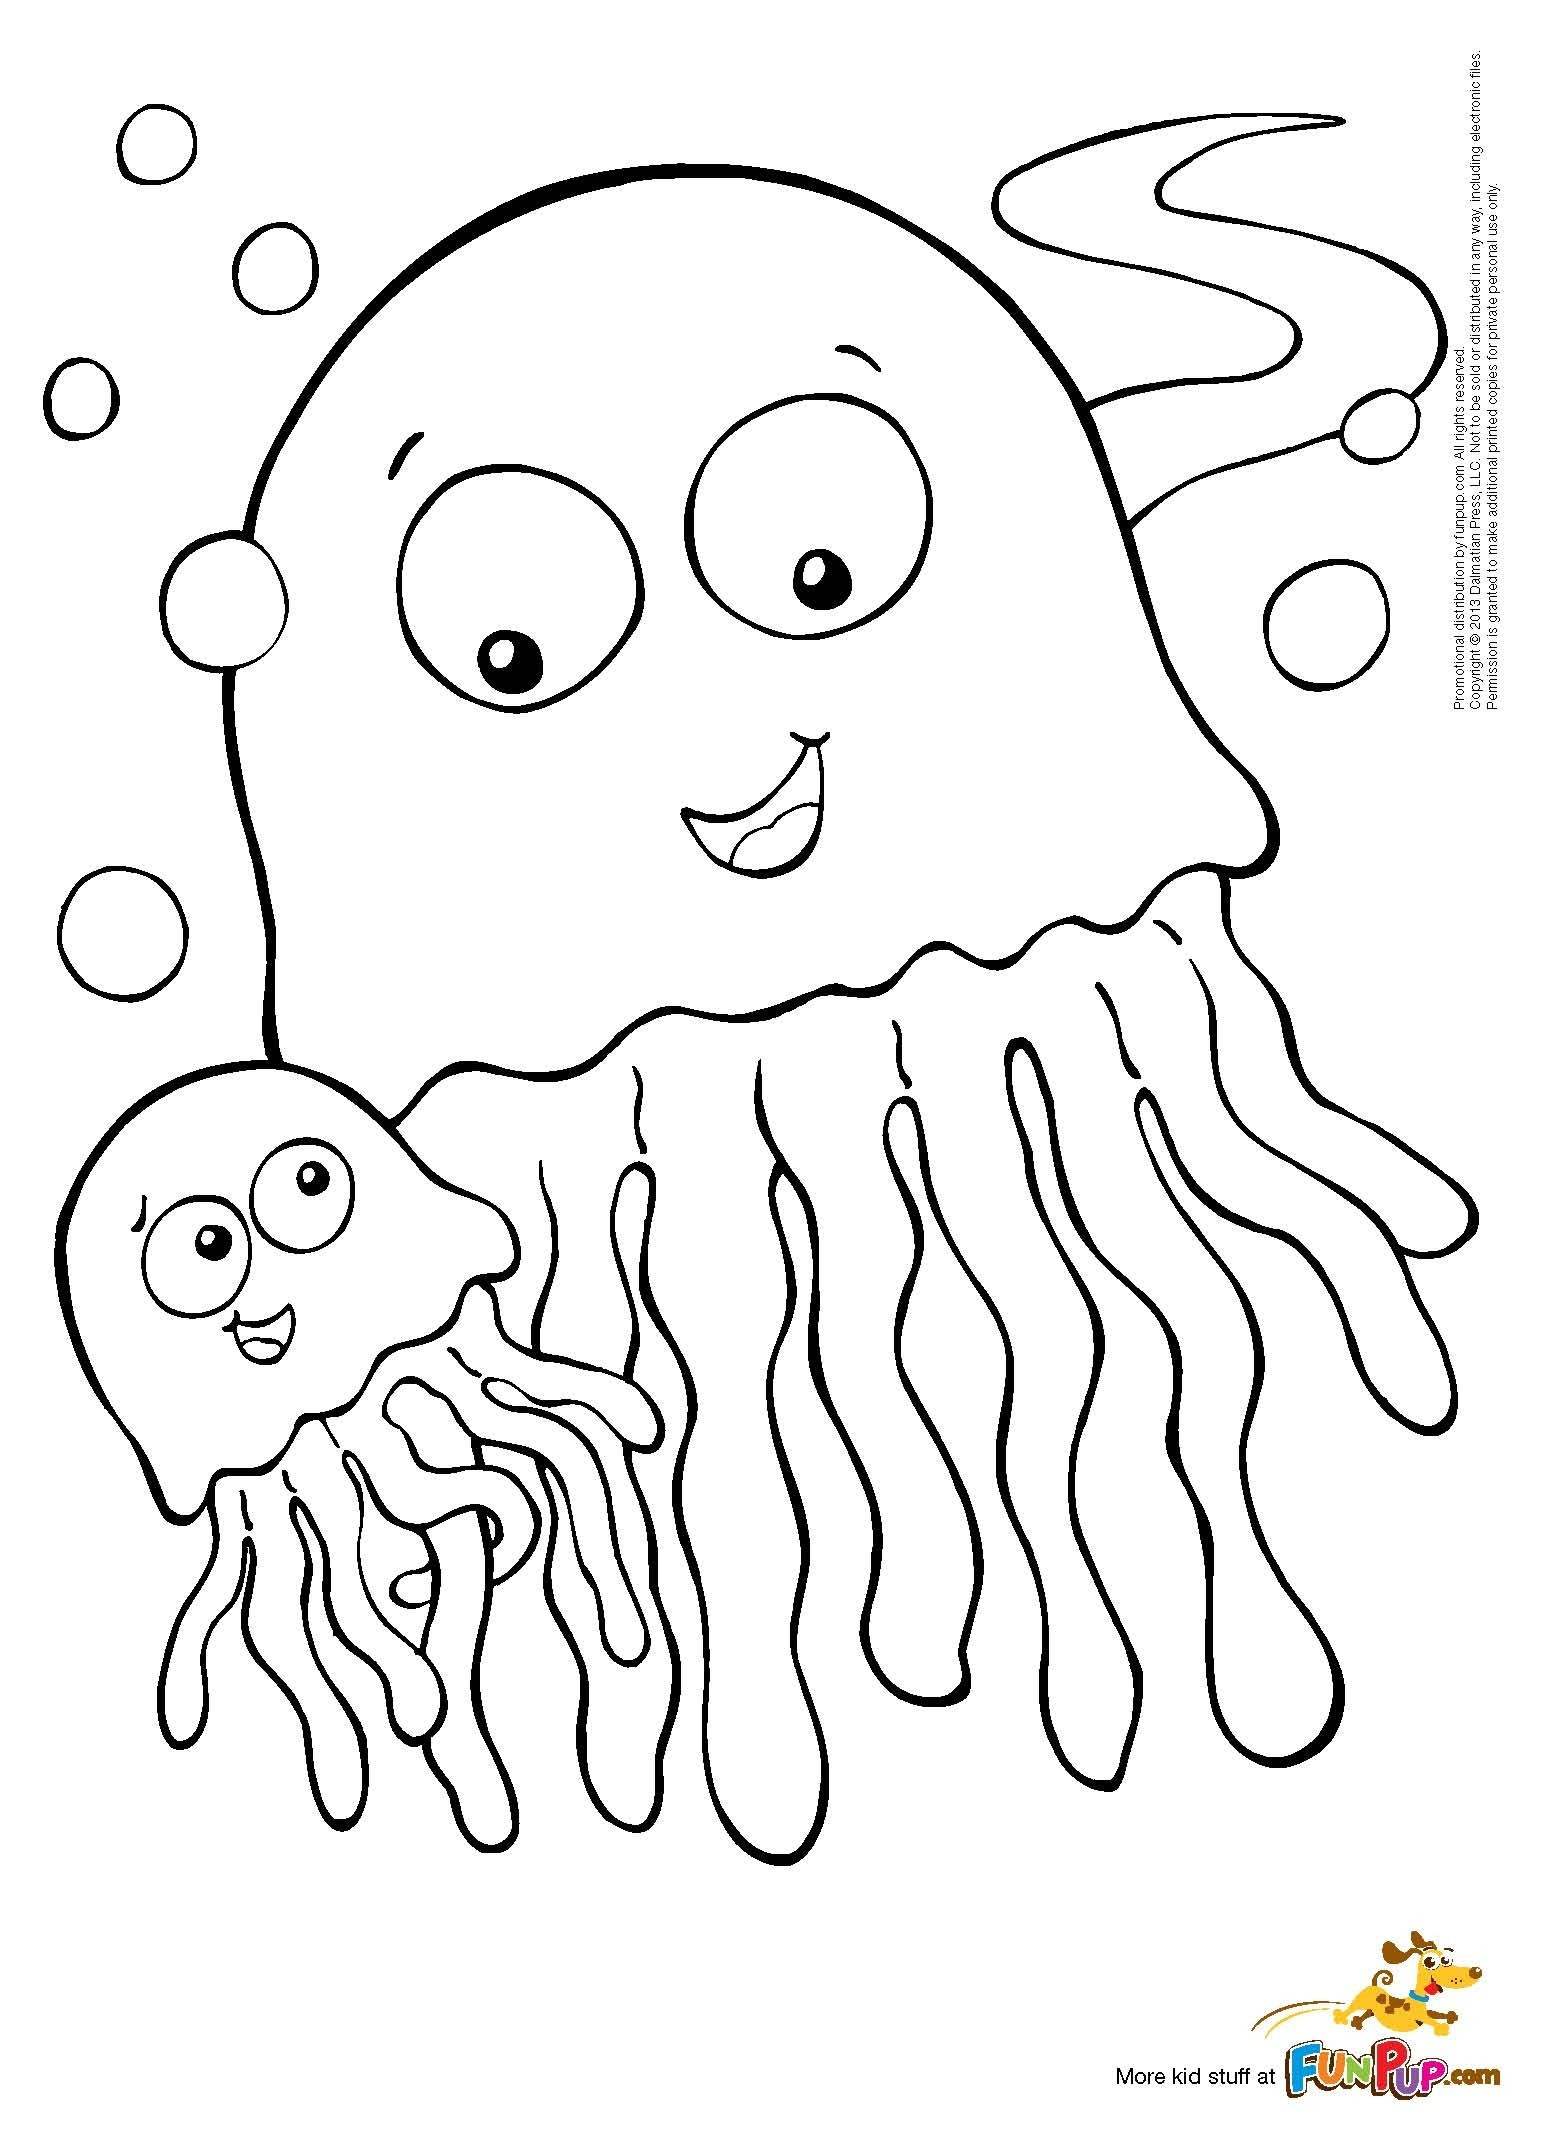 Download Coloring Pages For Kids
 Jelly Fish Coloring Pages Collection Coloring For Kids 2019